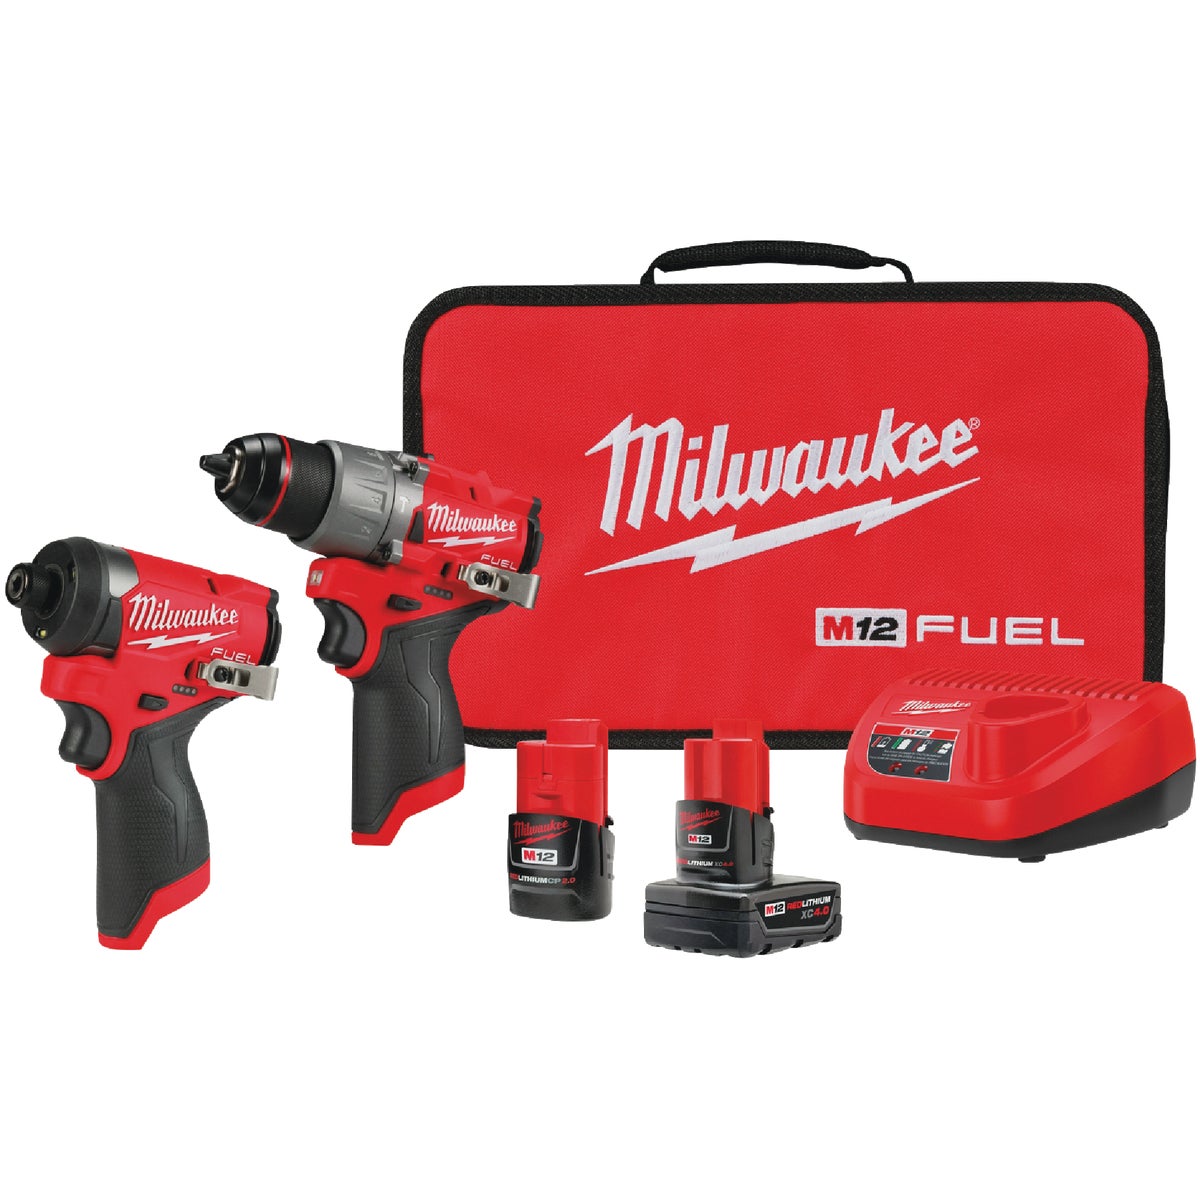 Milwaukee 2-Tool M12 FUEL 12 Volt Lithium-Ion Brushless Subcompact Hammer Drill & Impact Driver Cordless Tool Combo Kit